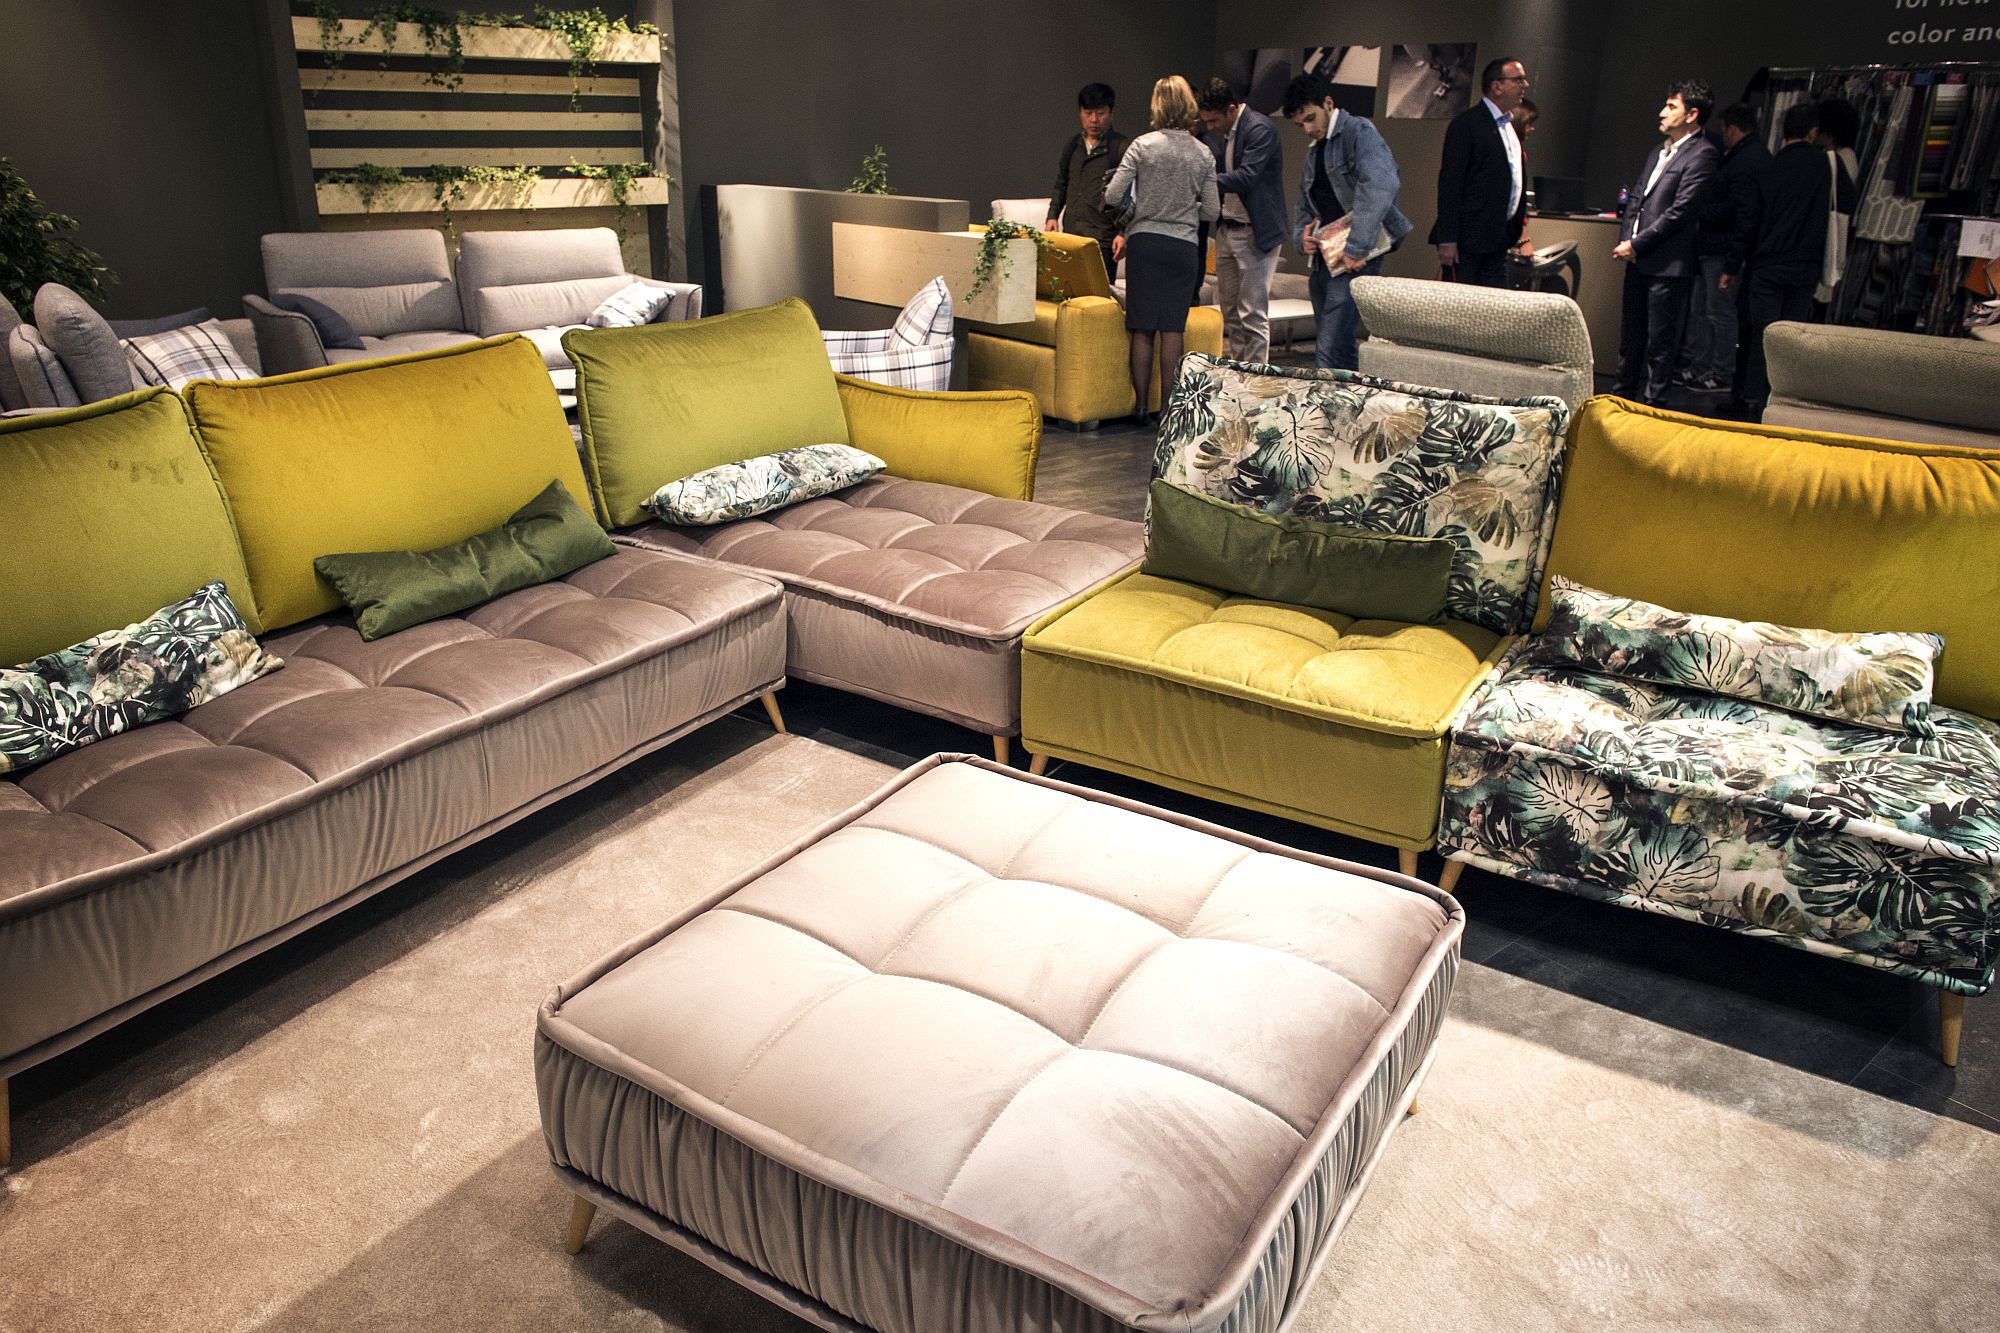 Pops-of-yellow-add-brightness-to-the-modular-sofa-composition